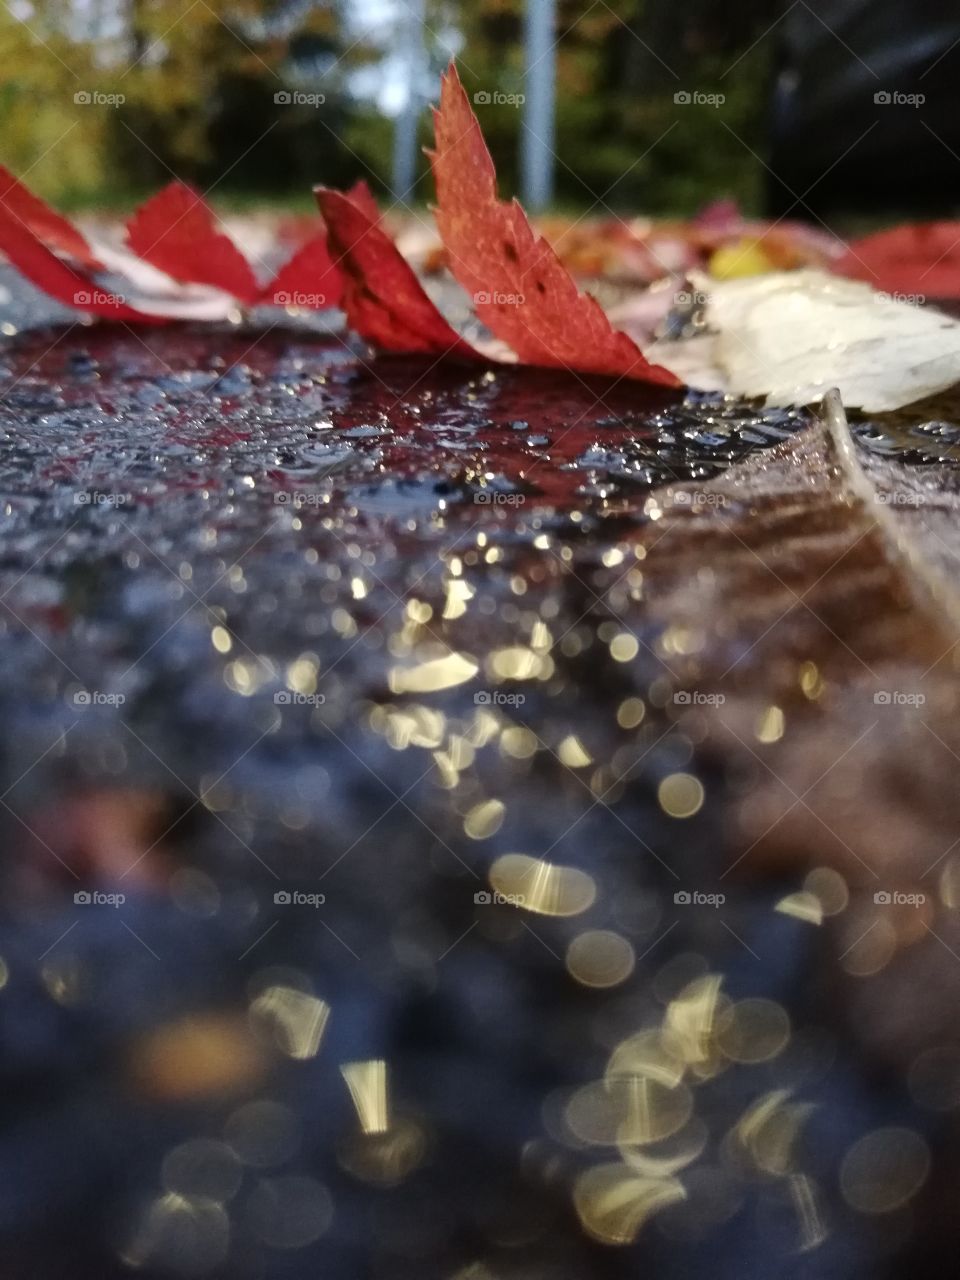 The dry fallen leaves of the rowan on a wet asphalt in the yard. The drops of water on a pale petiole and the red colored bent leaves, which are upside down. A blurry and bright view in the front.